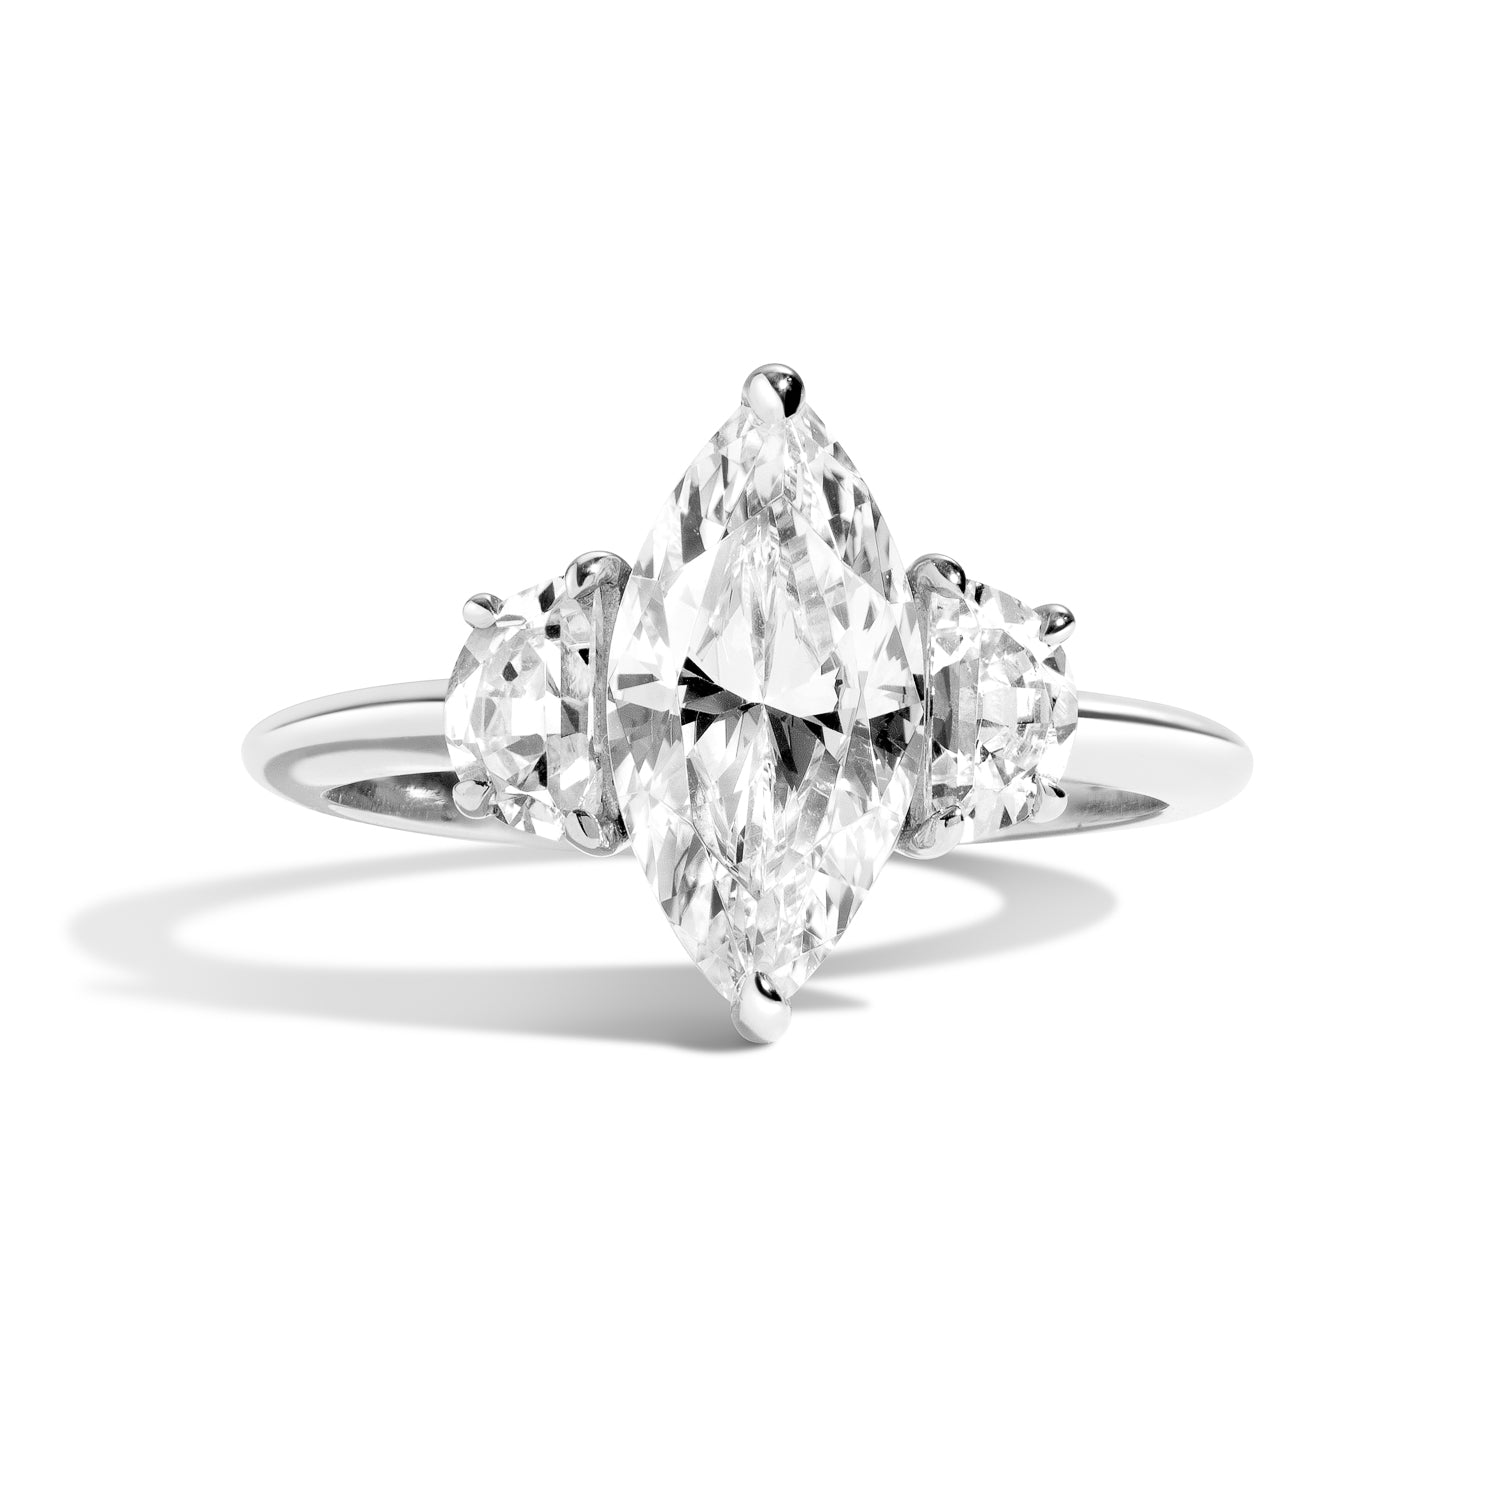 Shahla Karimi Jewelry 3-Stone Marquise + Half-Moon Ring in 14K White Gold or Platinum